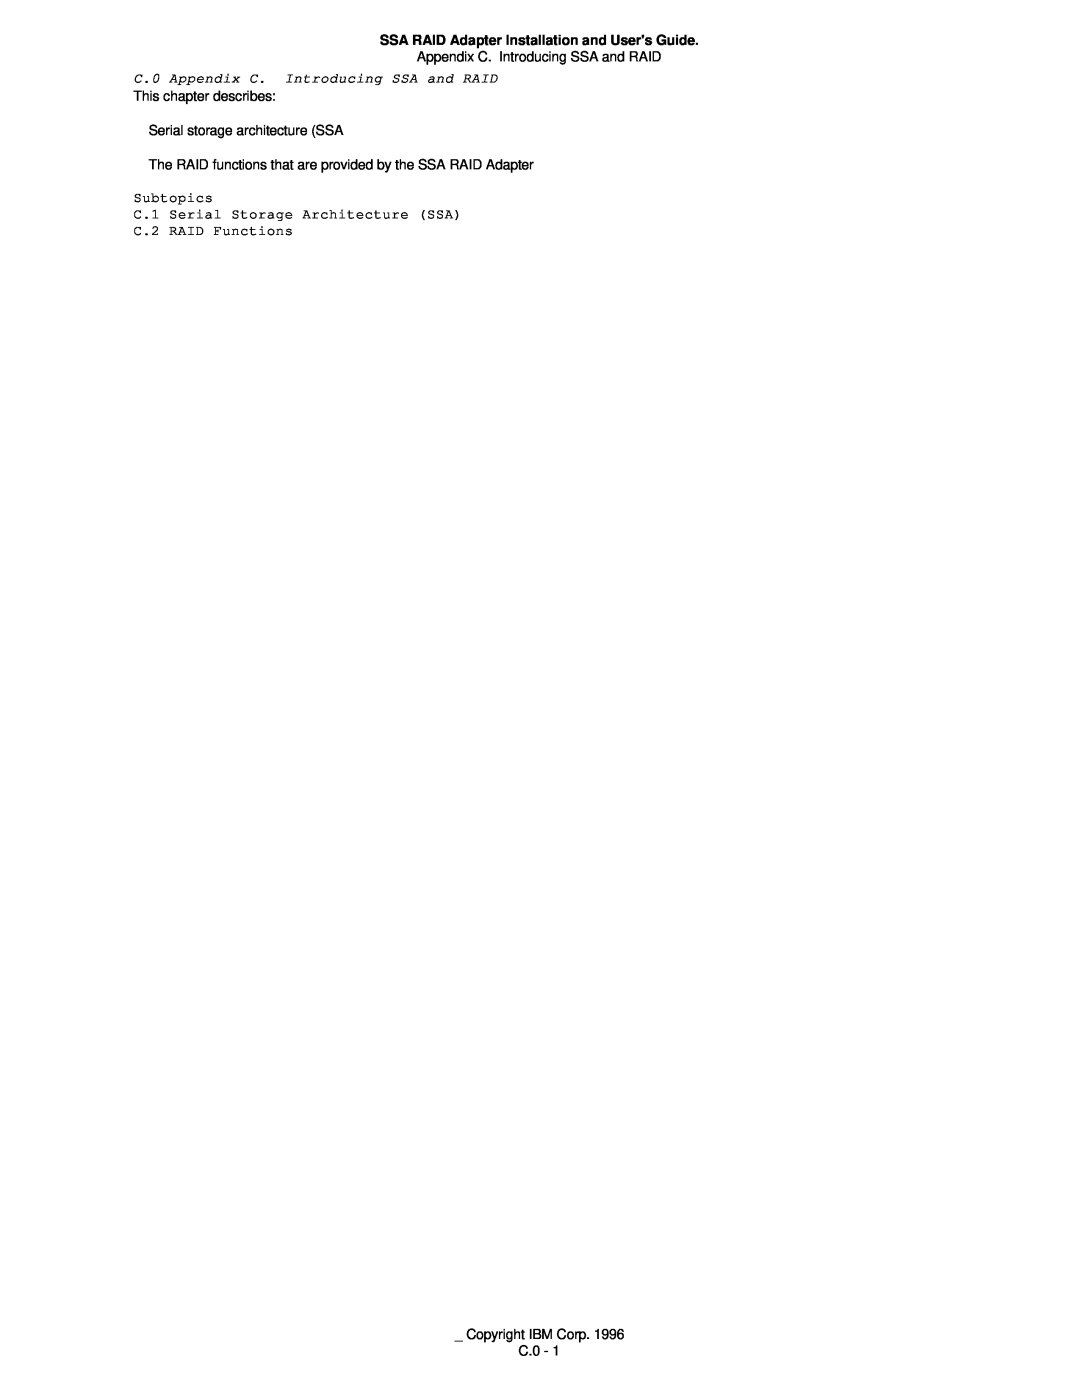 IBM 32H3816 SSA RAID Adapter Installation and Users Guide, Appendix C. Introducing SSA and RAID, Copyright IBM Corp C.0 